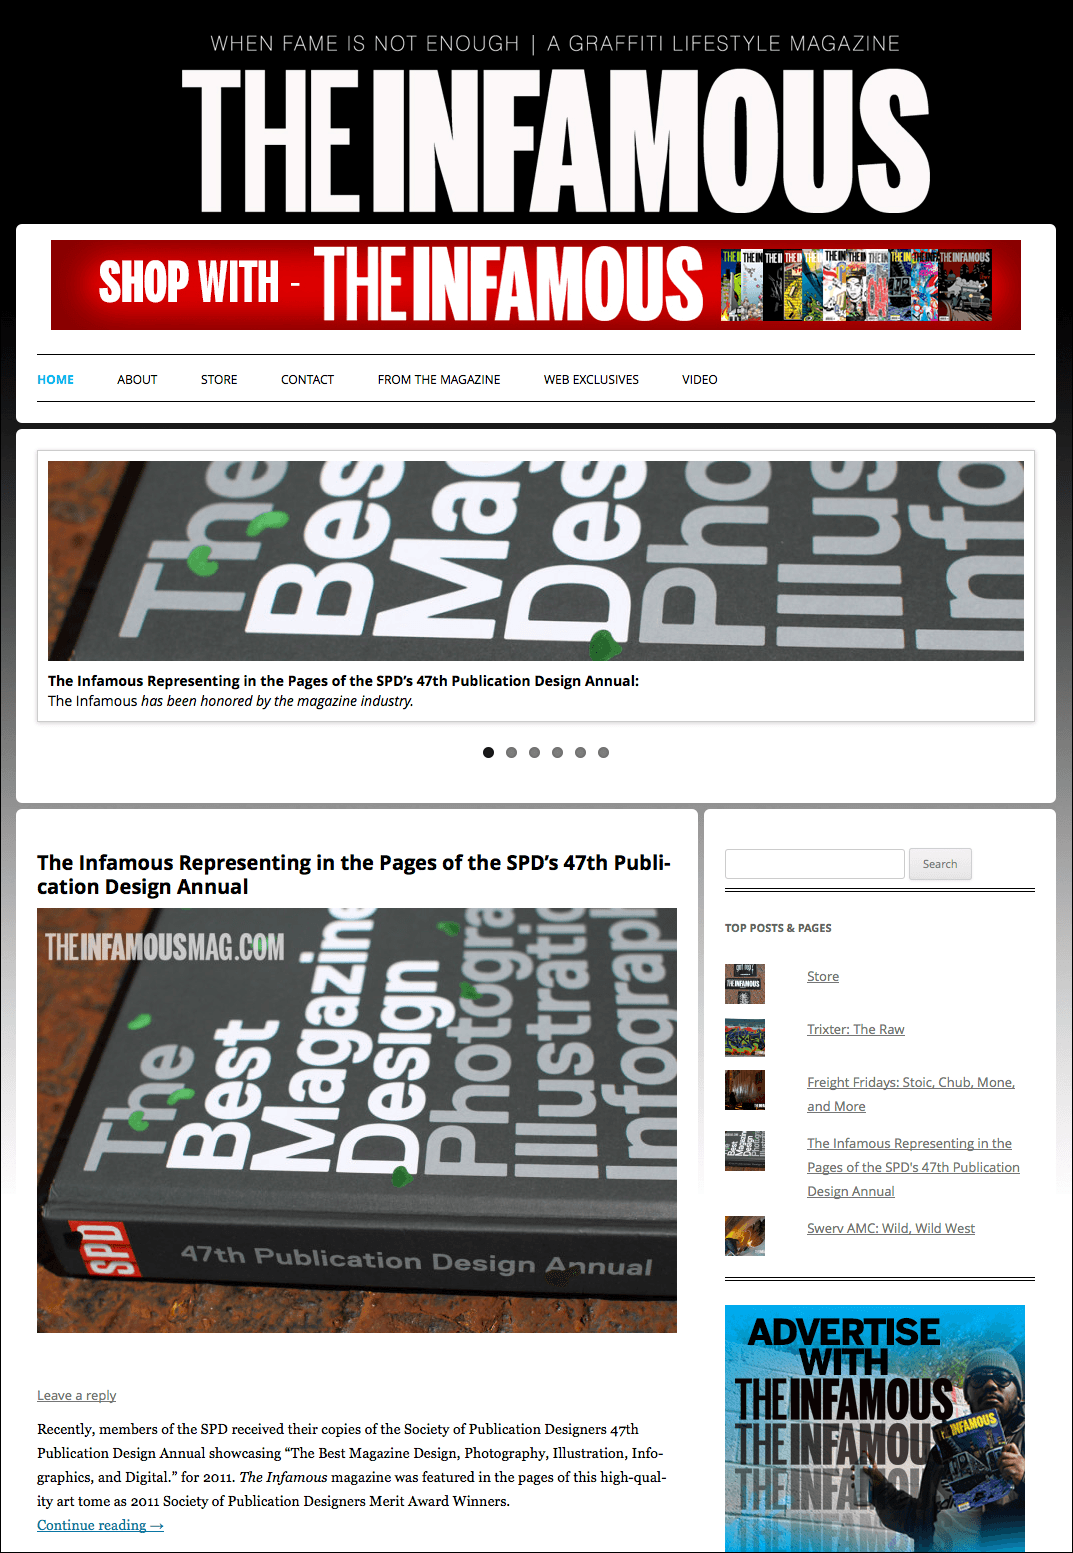 Screenshots and custom PHP code from the WordPress site I created for The Infamous Magazine.